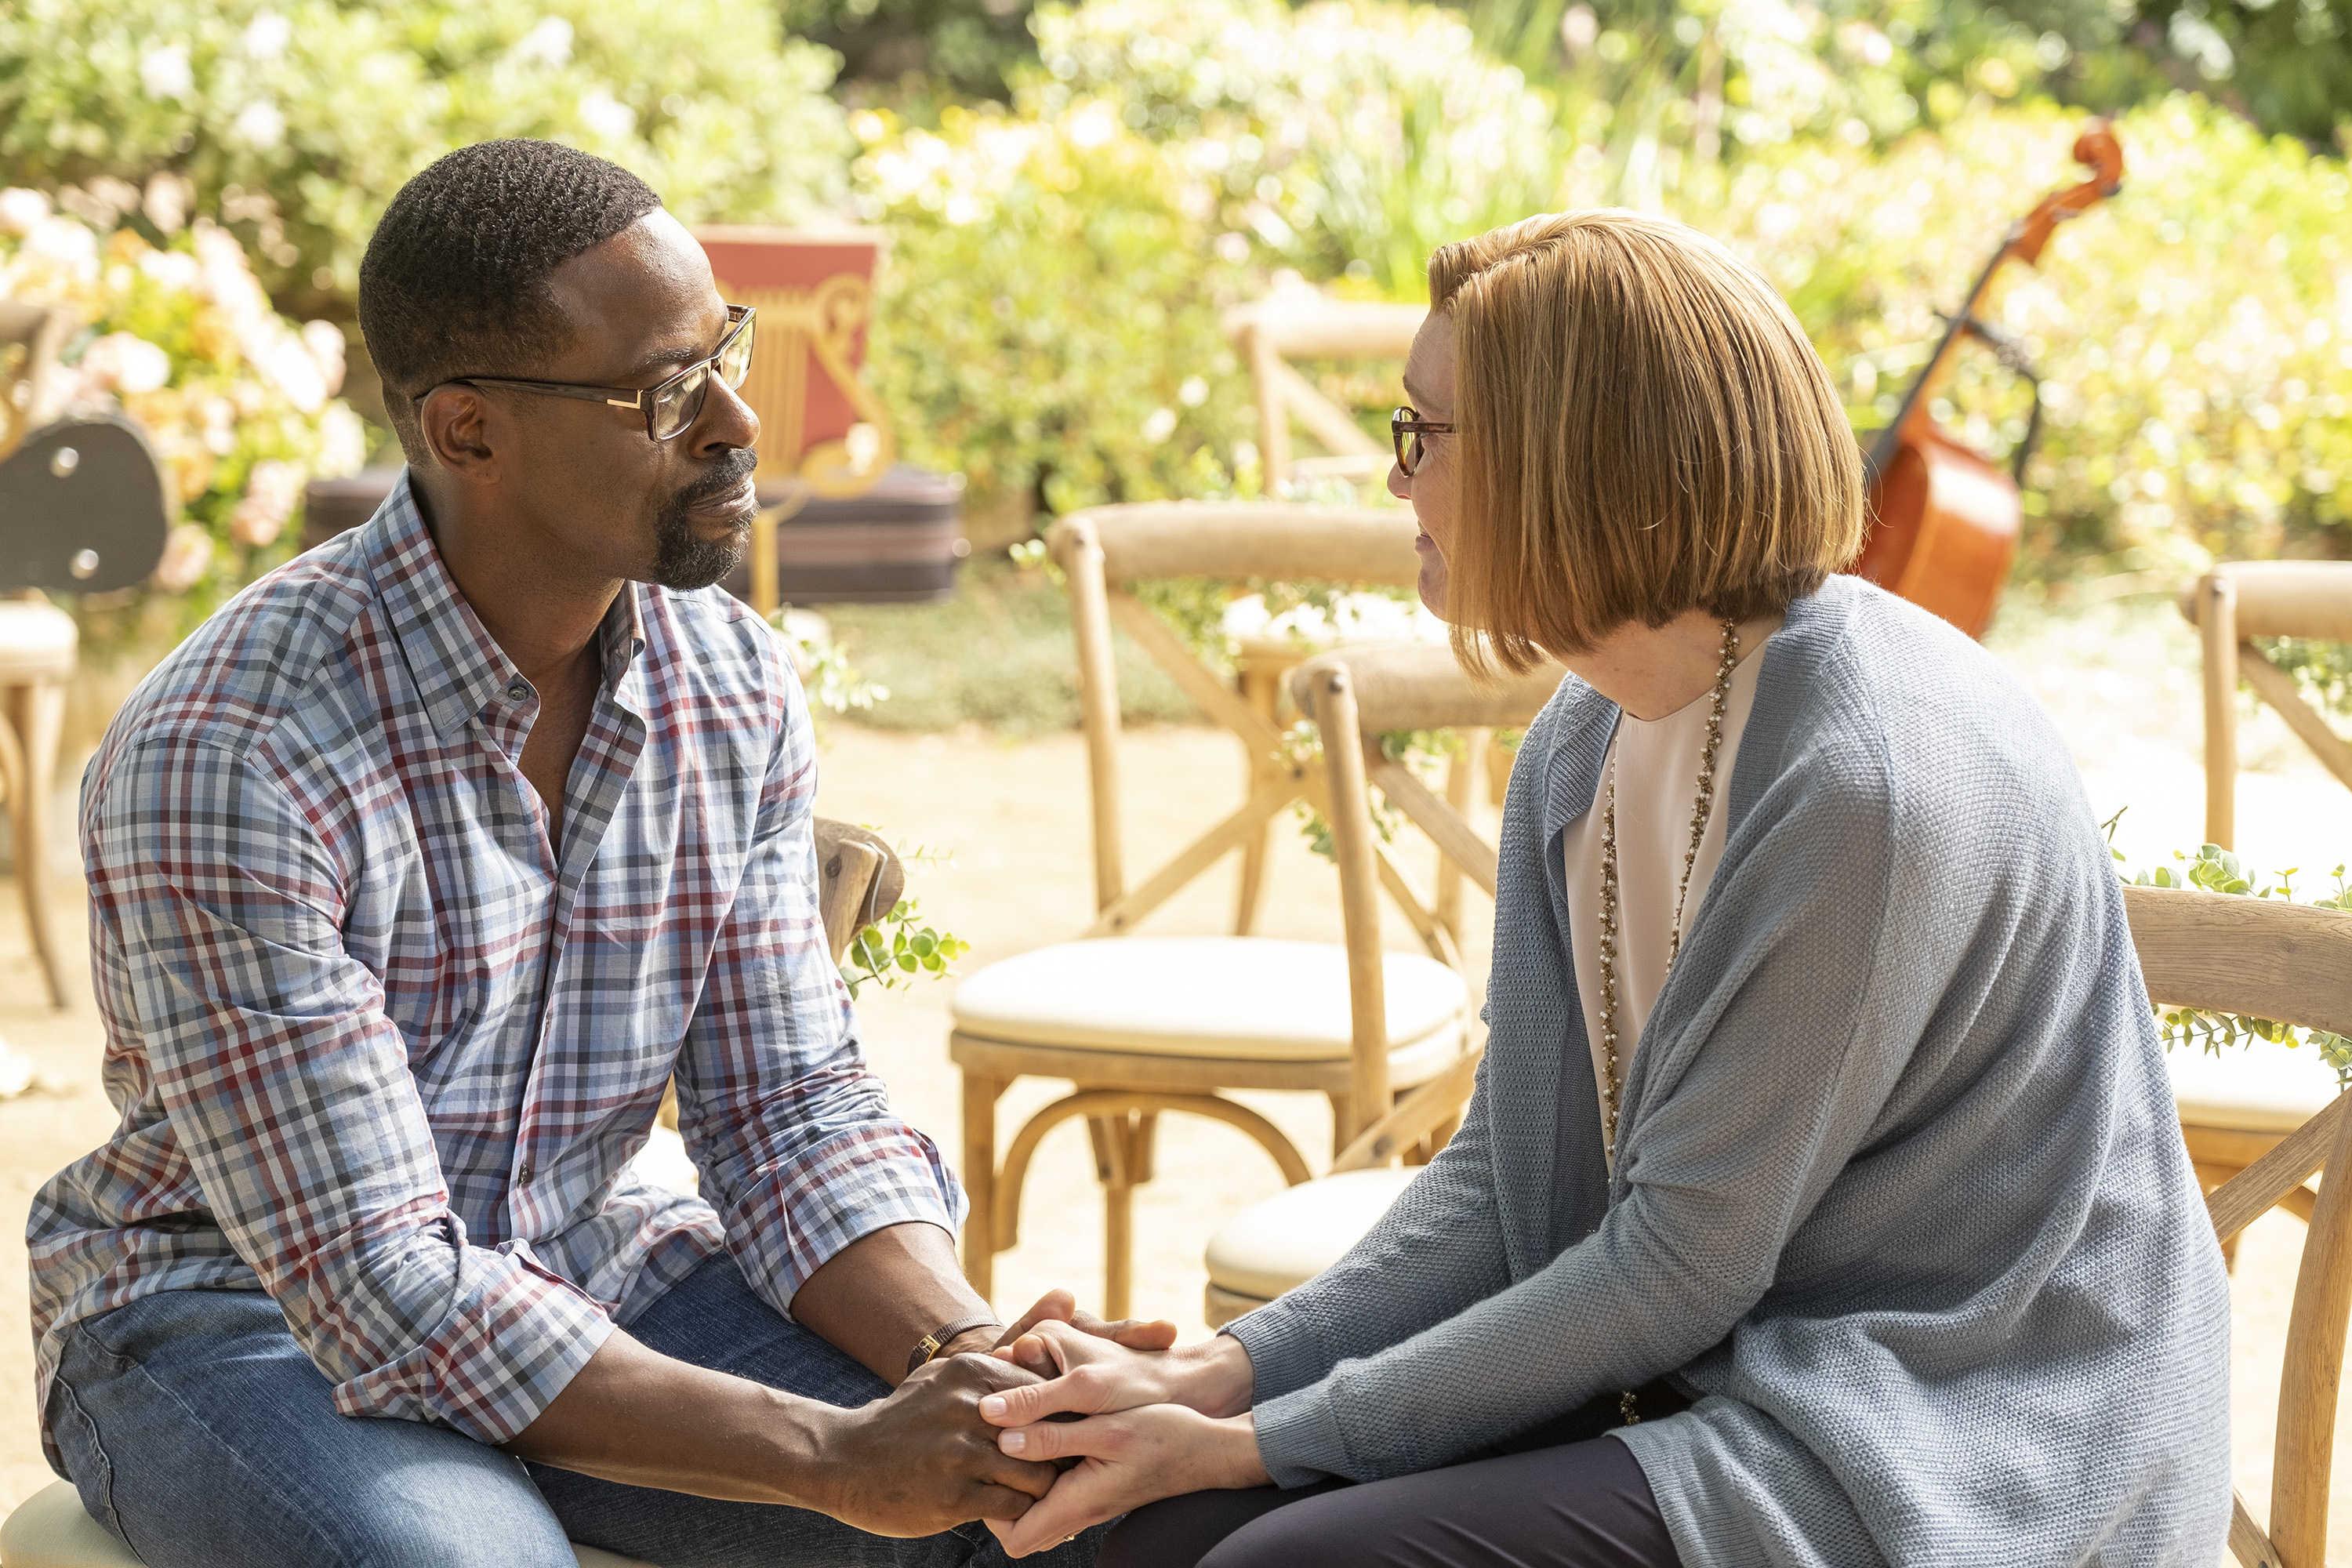 'This Is Us' Season 6 stars Sterling K. Brown and Mandy Moore, in character as Randall and Rebecca, hold hands as they talk. Randall wears a blue and red plaid shirt and jeans. Rebecca wears a blue cardigan over a white shirt and black pants.